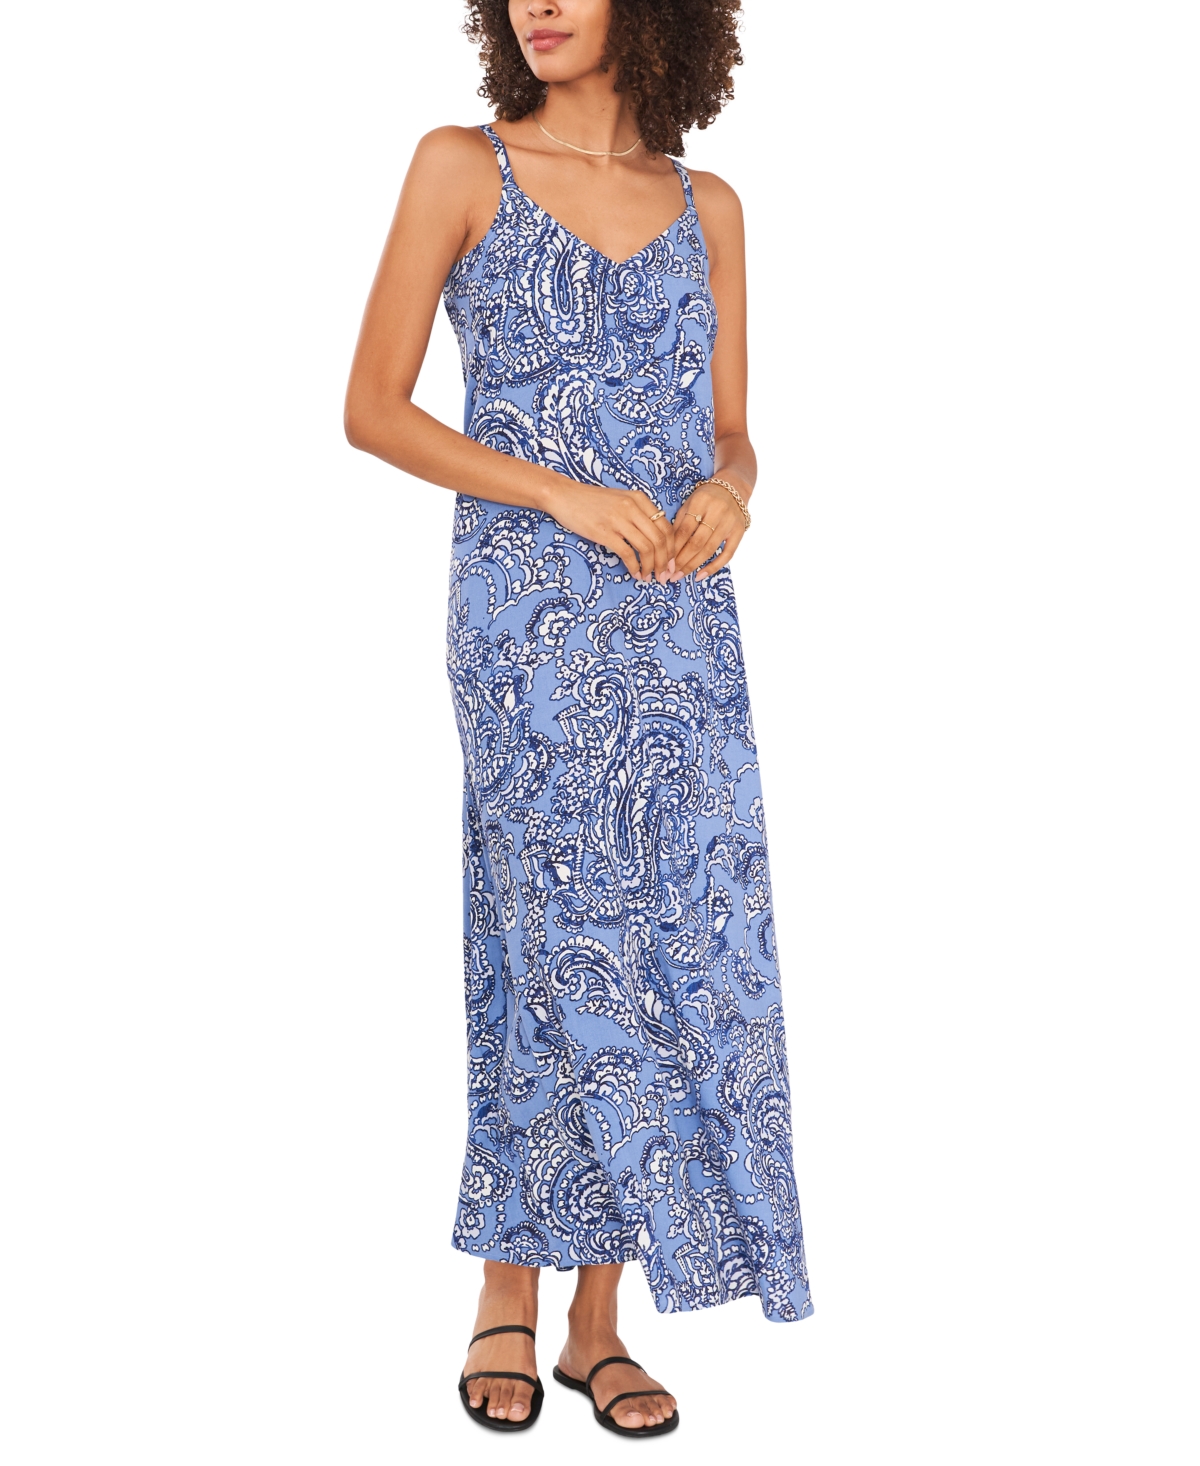 Vince Camuto Women's Embellished Paisley Maxi Dress